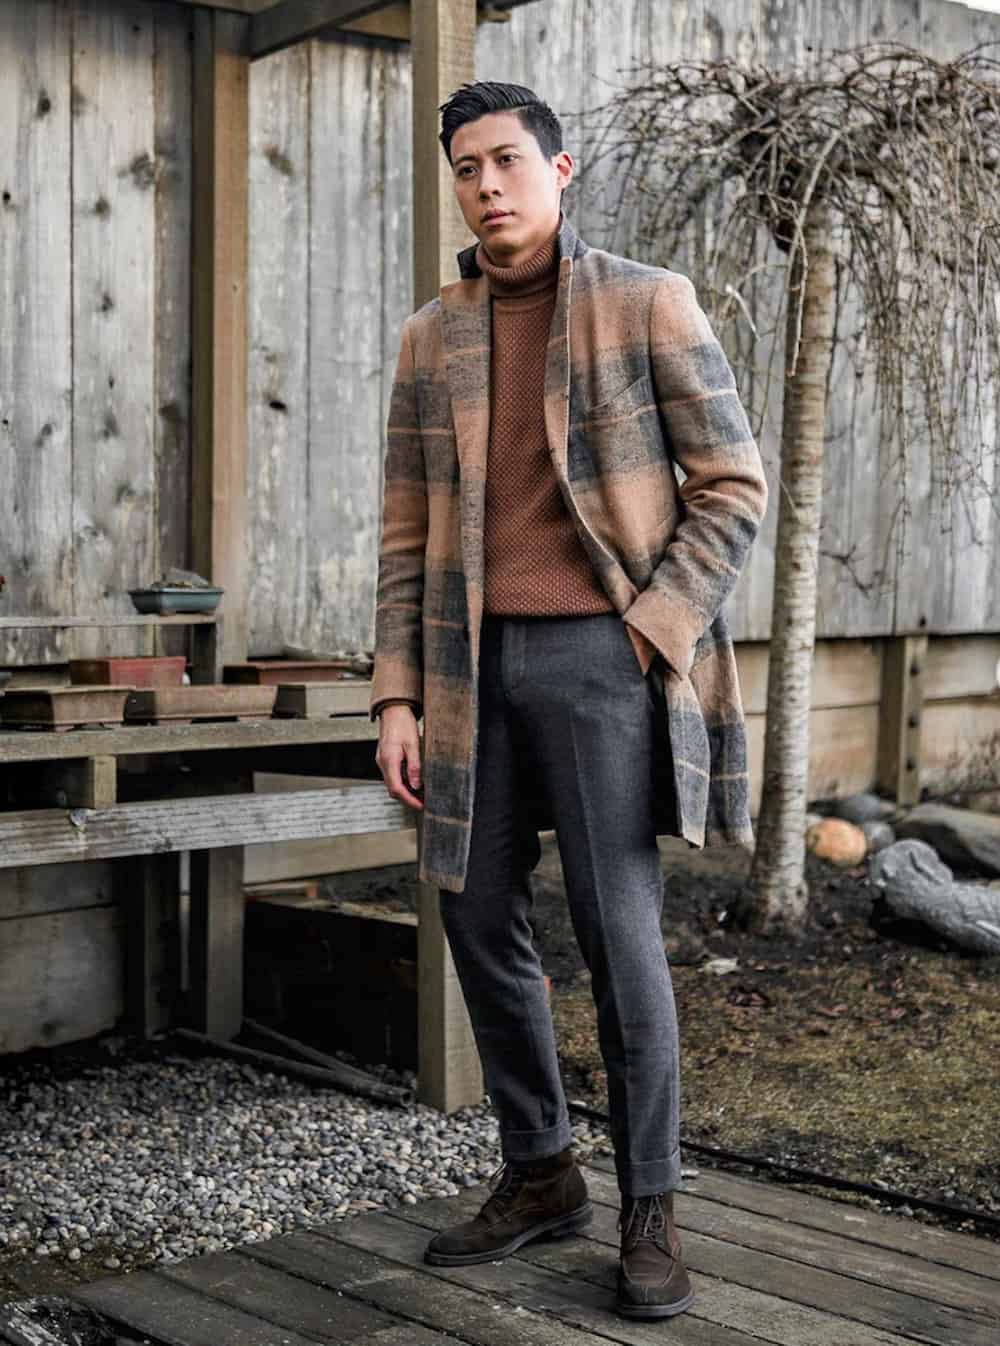 mangel Magtfulde I Grey Pants Brown Shoes: How To Master This Outfit! (Men)